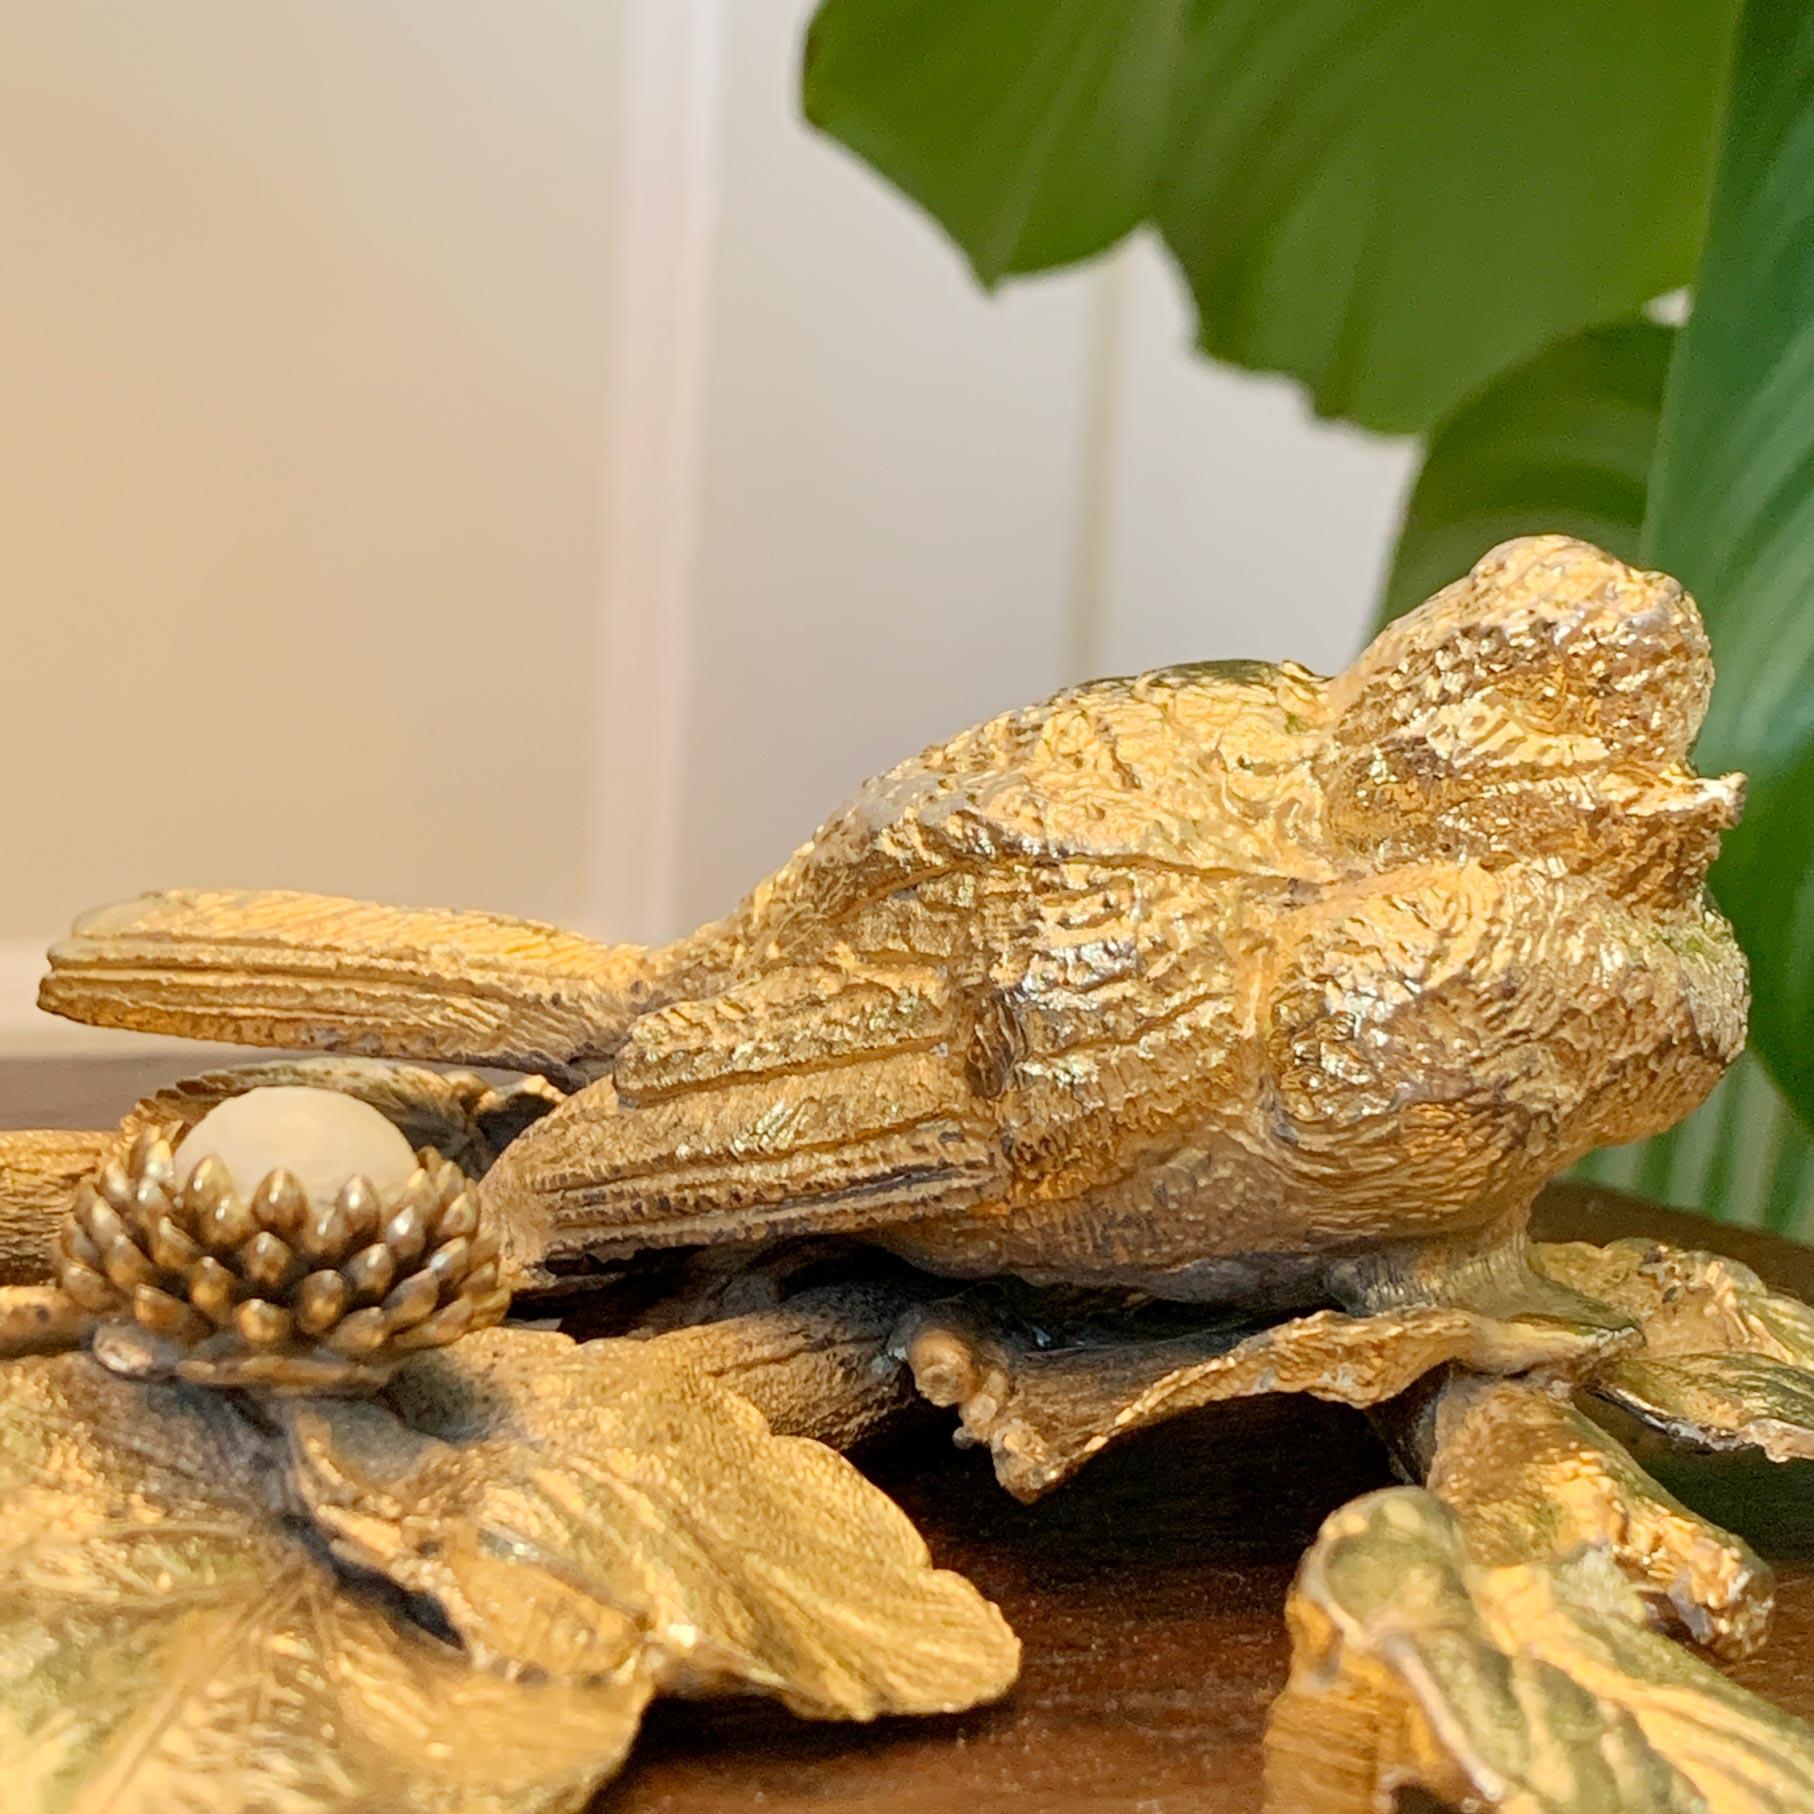 Bird & flowers table light, designed by Regis Dho for Fondica in Gisors, France, 1980's

This rare and pretty gilt plated bronze lamp depicts a small garden bird within leaves and flowers. The flowers are set with decorative cream centres and two